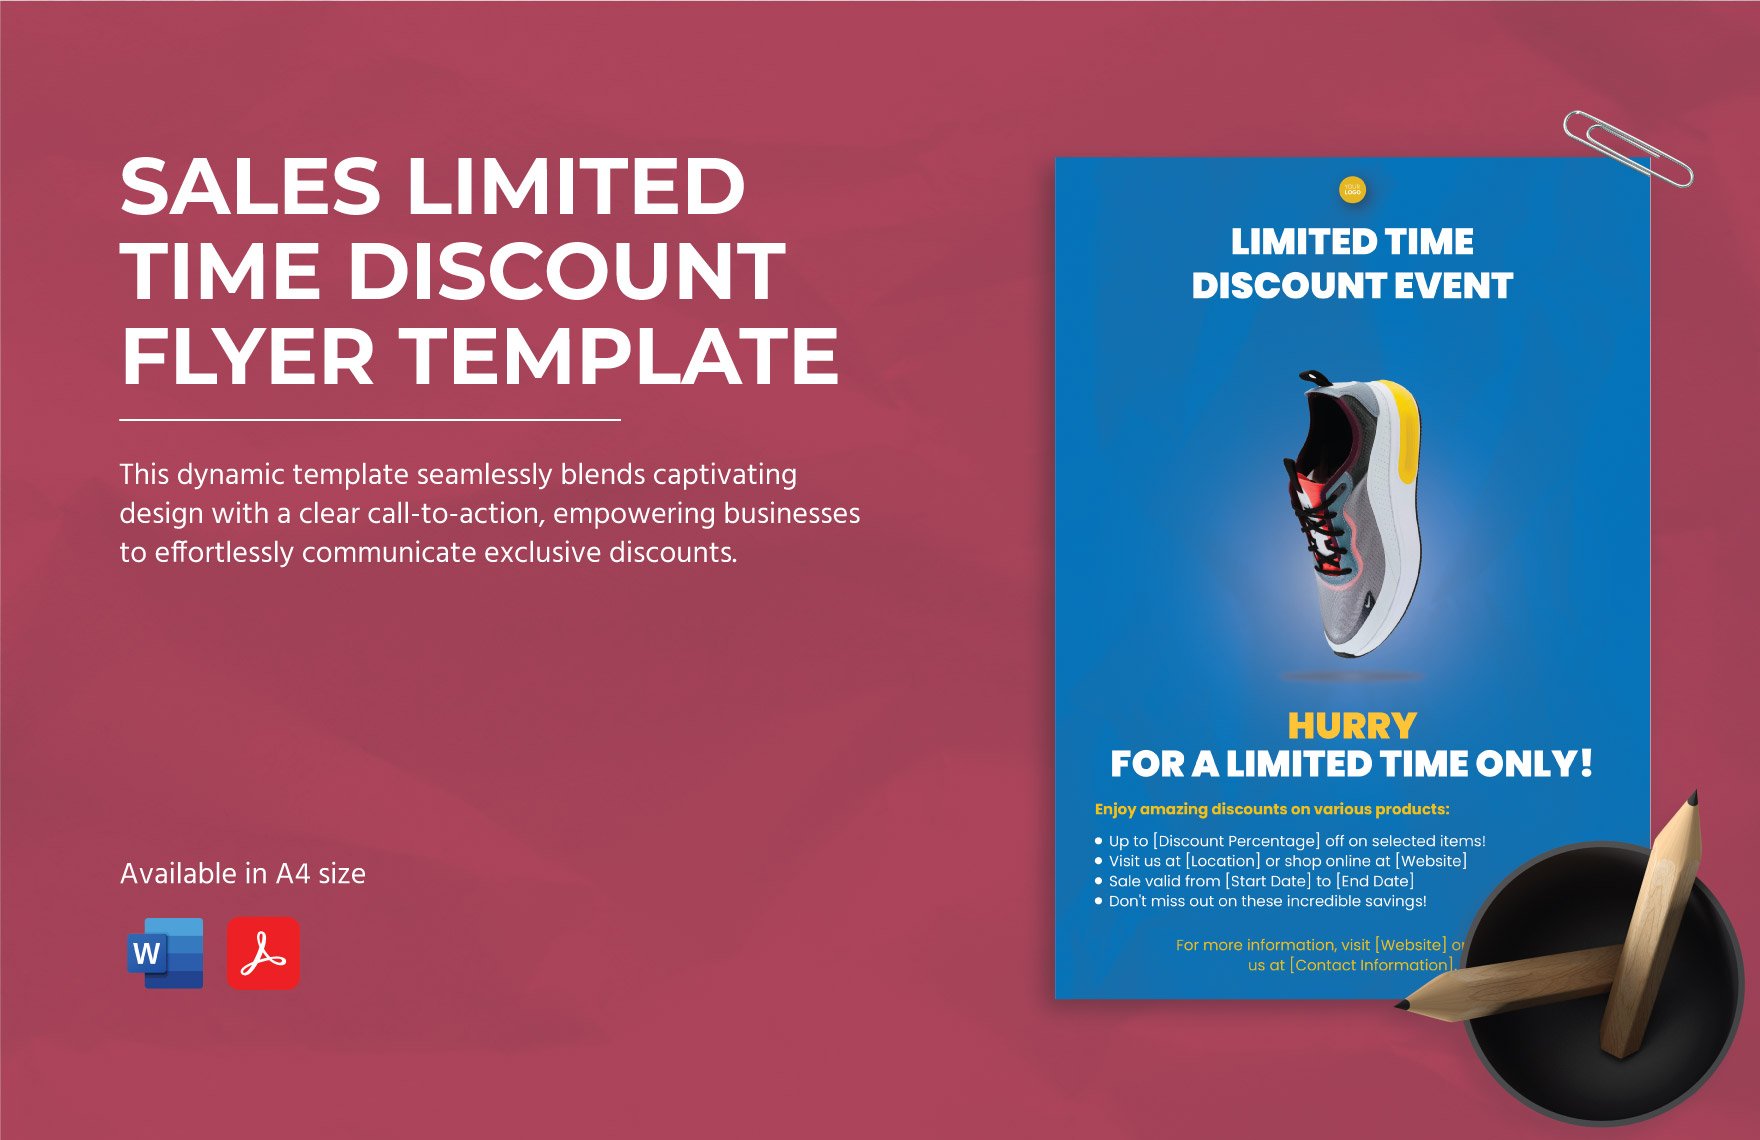 Sales Limited Time Discount Flyer Template